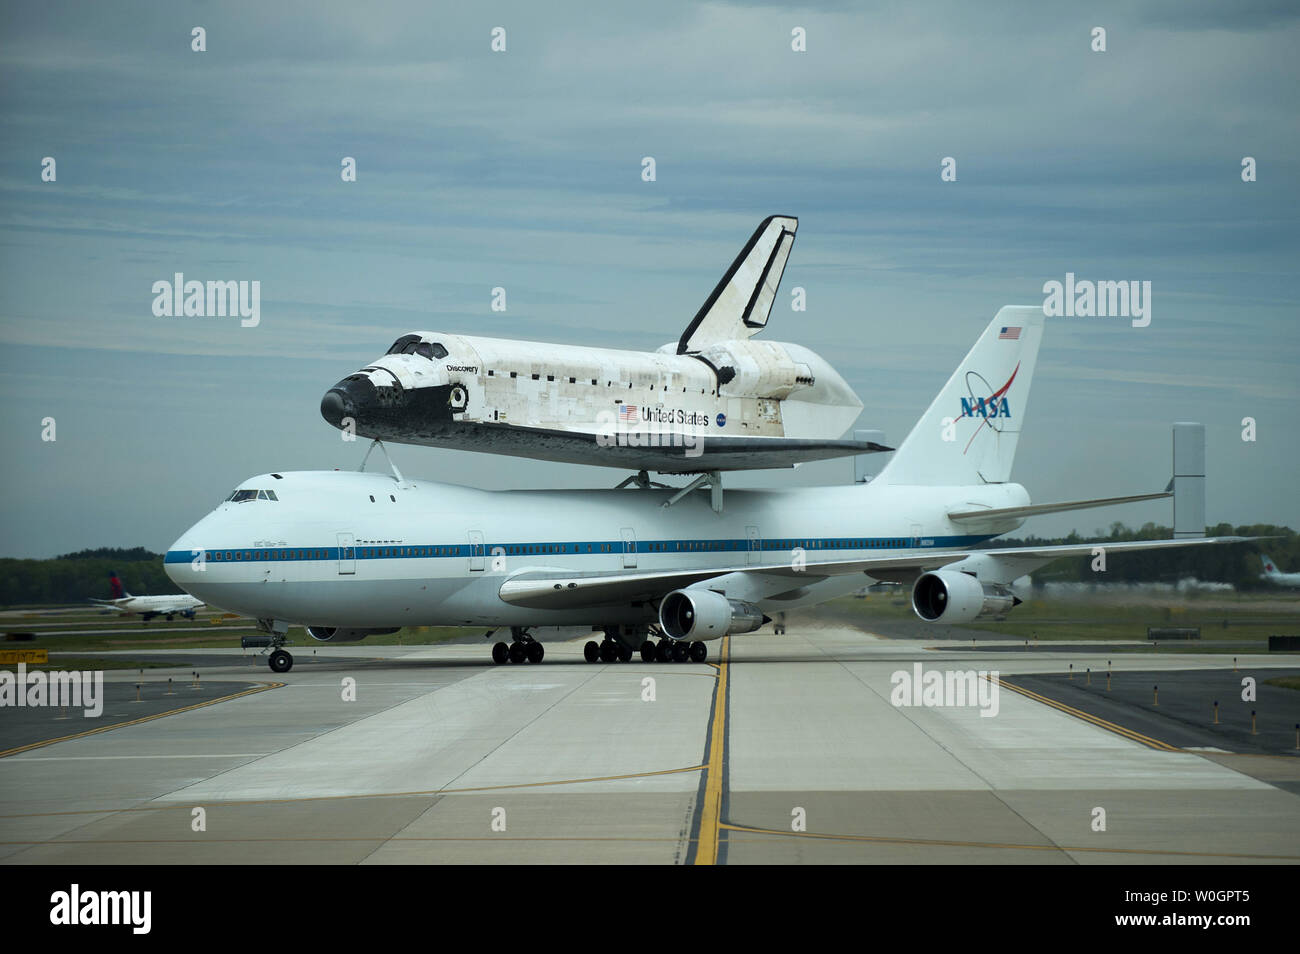 Space Shuttle Discovery, riding atop NASA's 747 shuttle carrier aircraft, taxis on the runway after landing at Dulles International Airport in Chantilly, Virginia on April 17, 2012.  Discovery, which ended it's last mission on March 9, 2011, is being put on permanent display at the Smithsonian's National Air and Space MuseumÍs Udvar-Hazy Center in Chantily, Virginia.  UPI/Kevin Dietsch Stock Photo